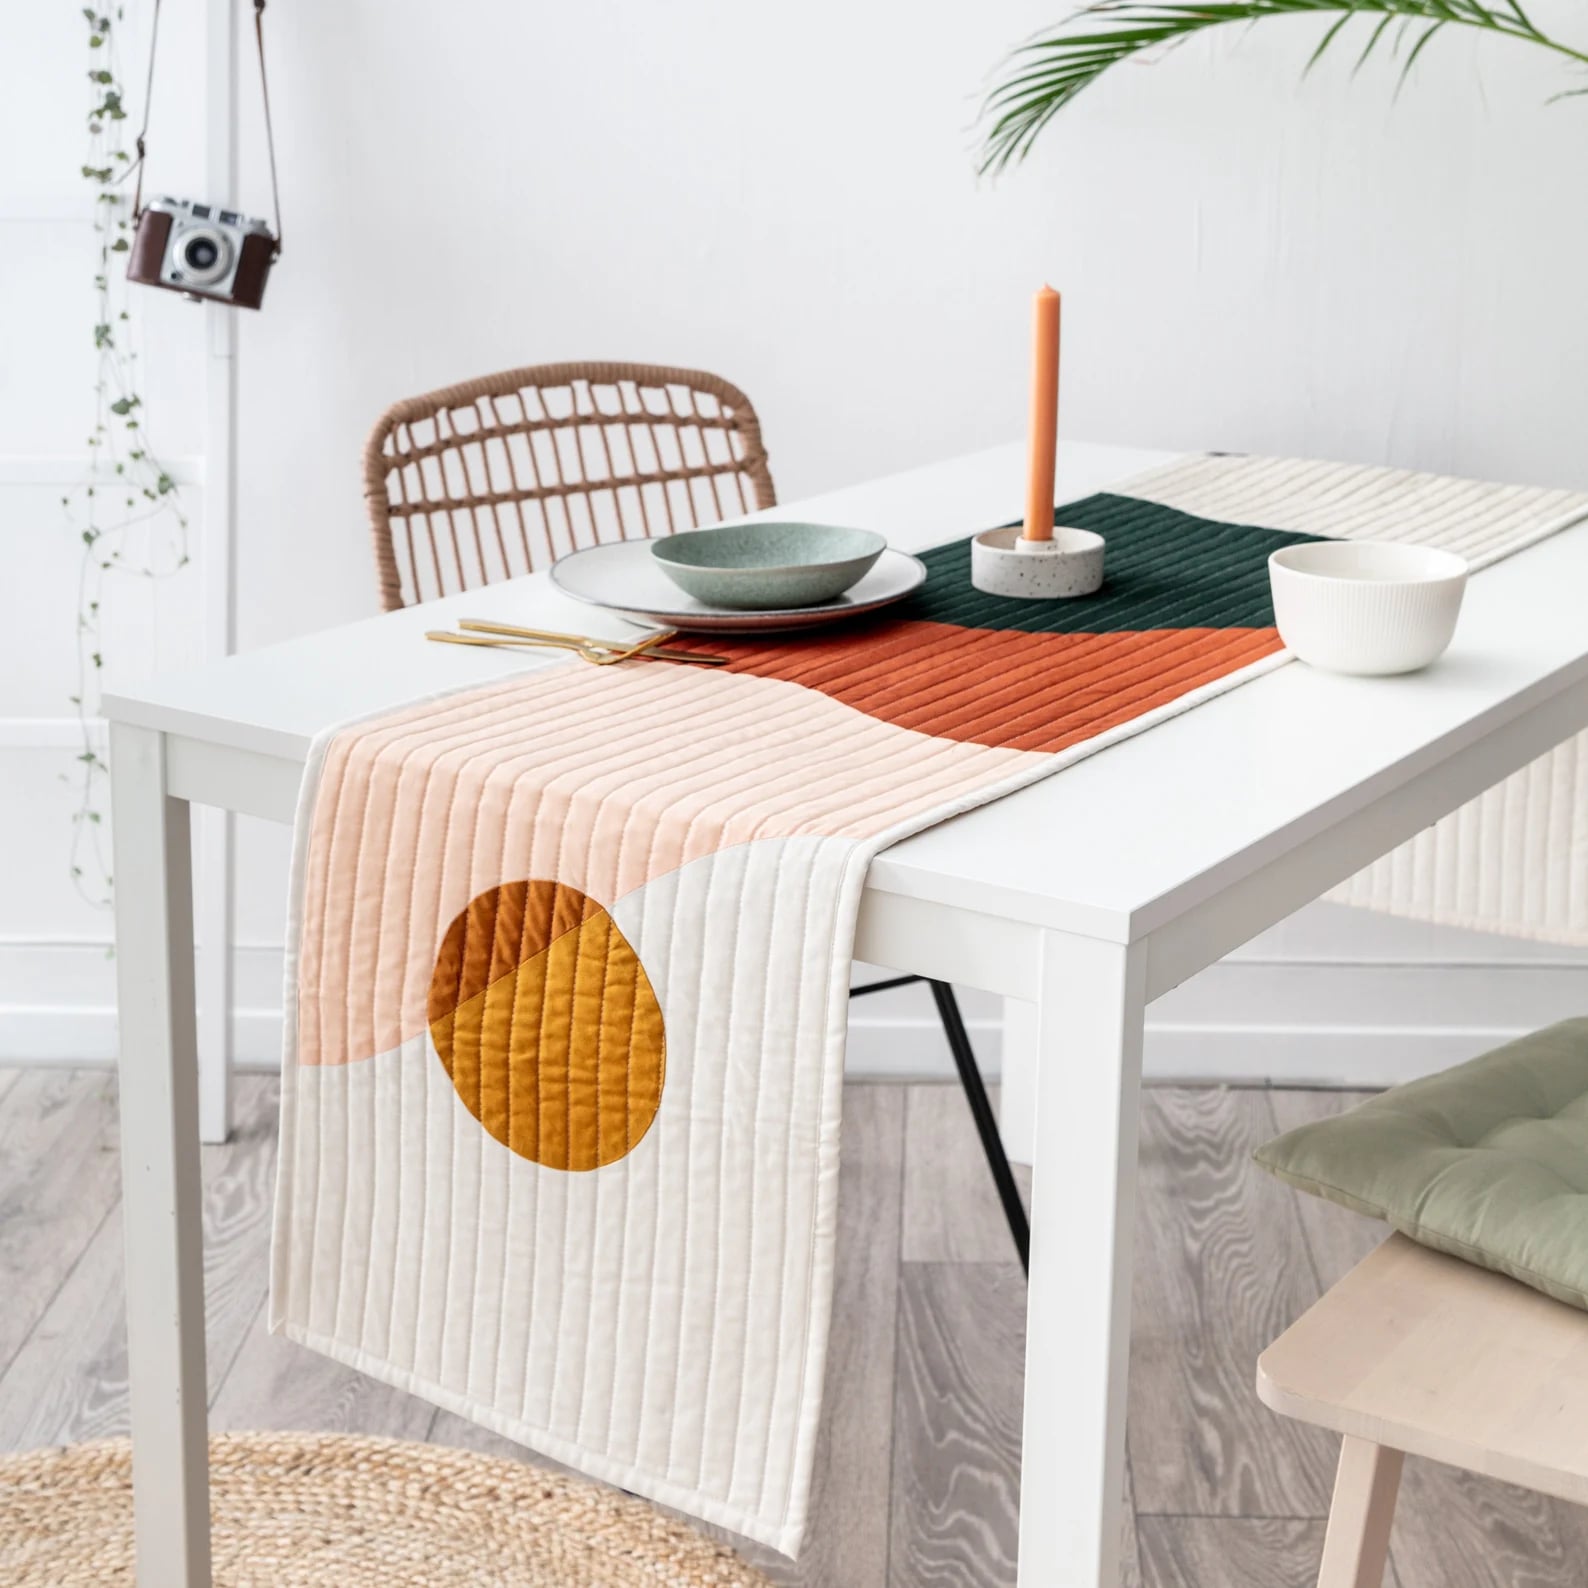 A Quilt Table Runner: Modern Table Runner, Shop Our Top 10 Picks From  's Design Award Finalists